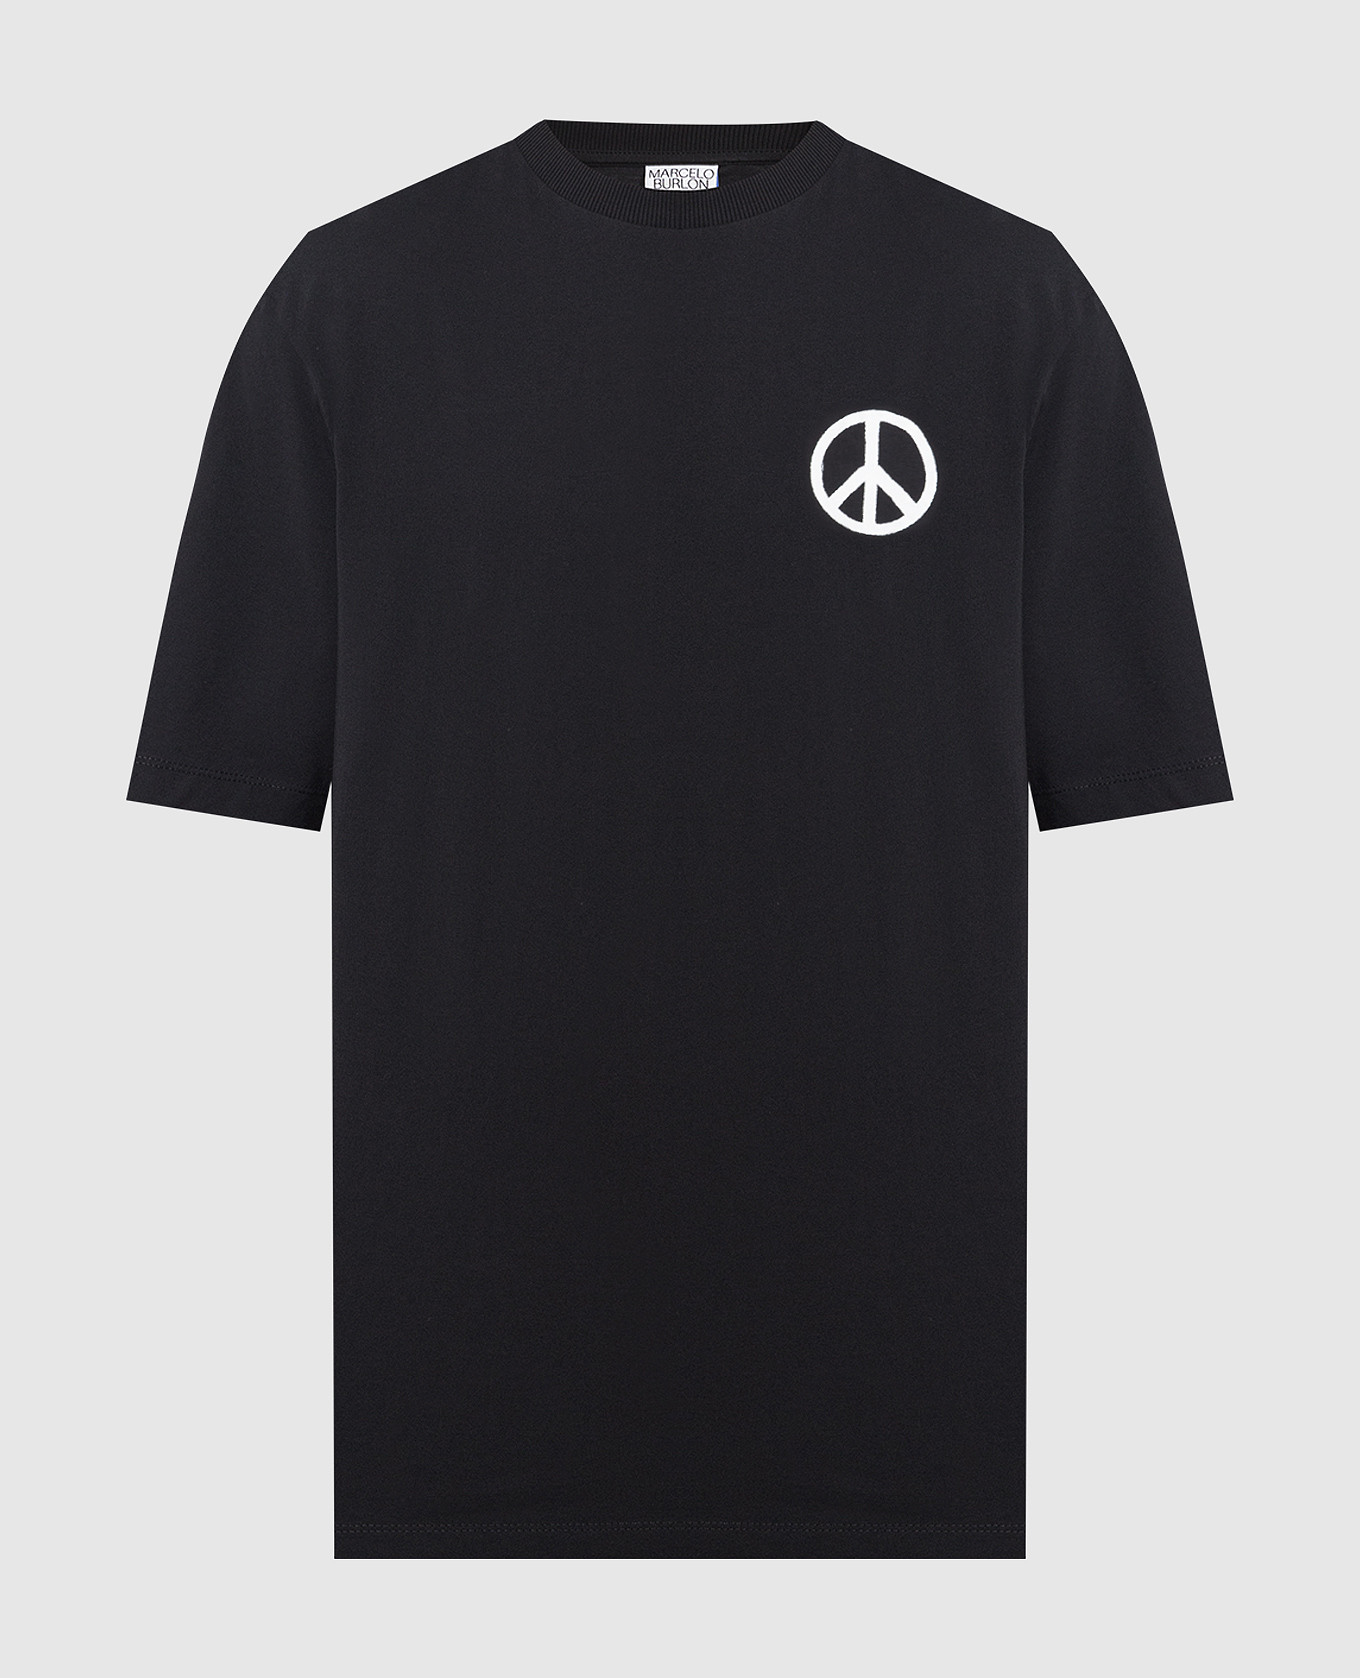 Black T-shirt COUNTY PEACE OVER with a print